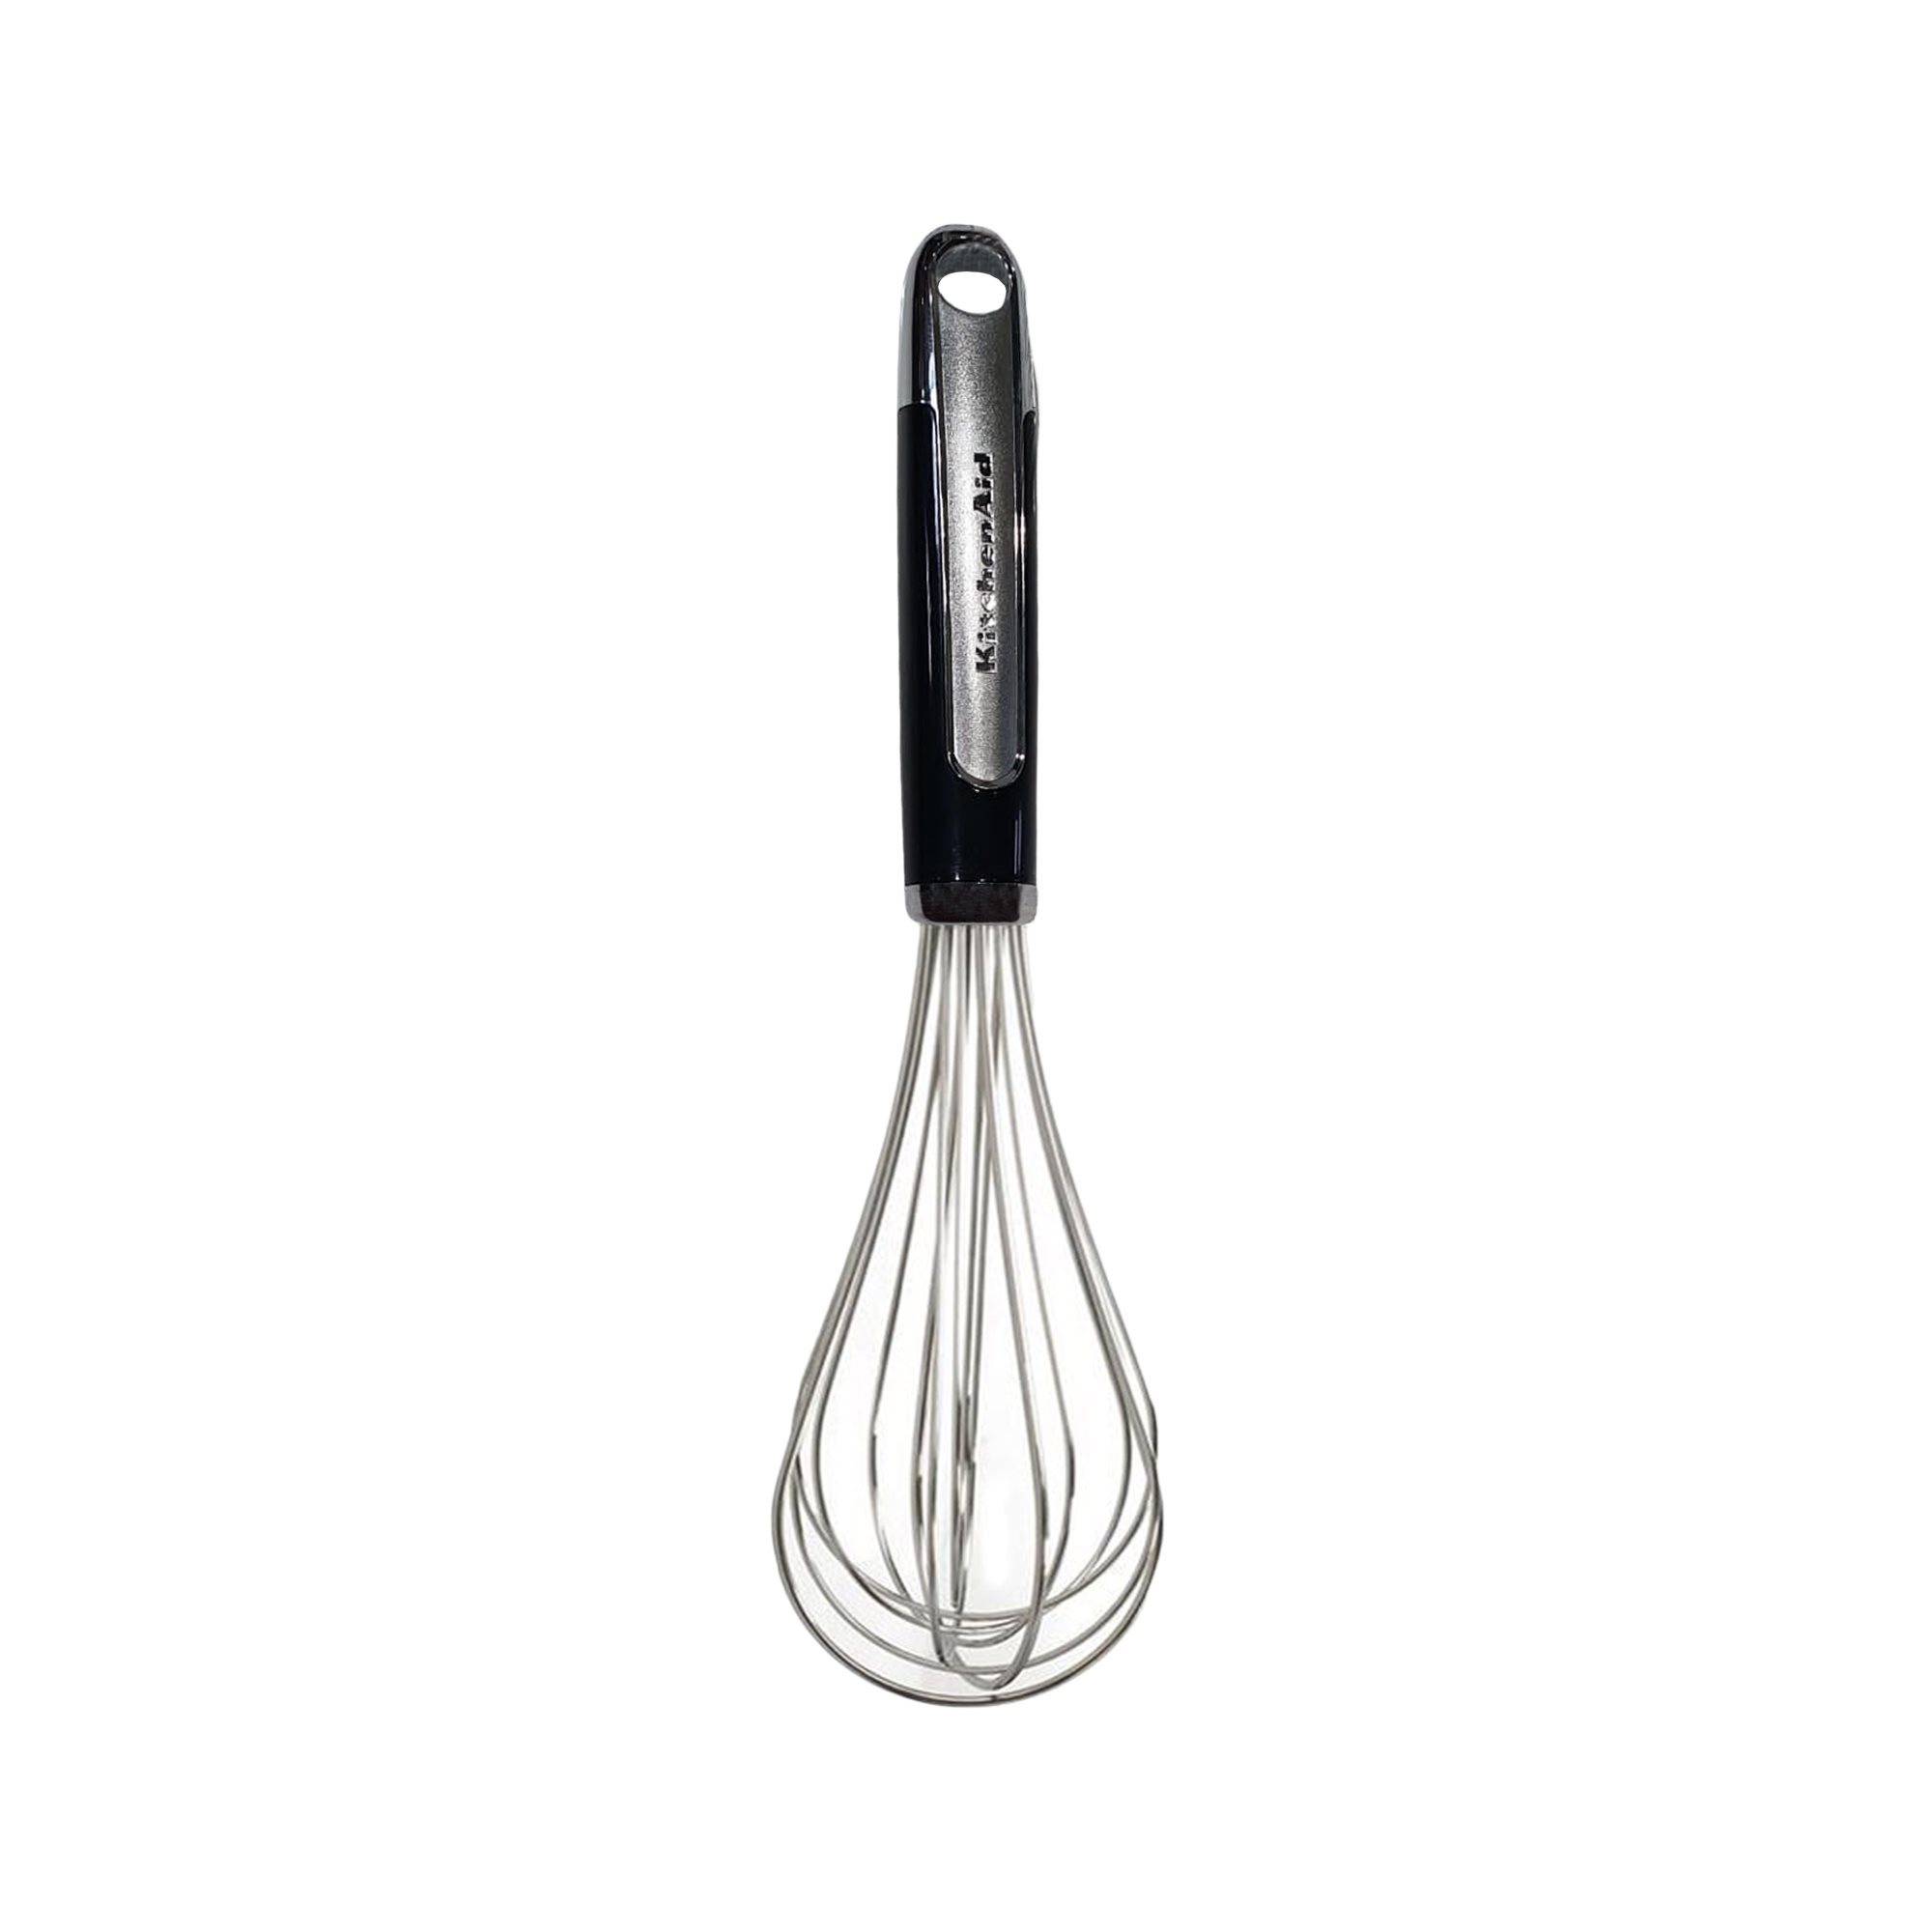 Baster with Marinade Injector & Cleaning Brush - Whisk